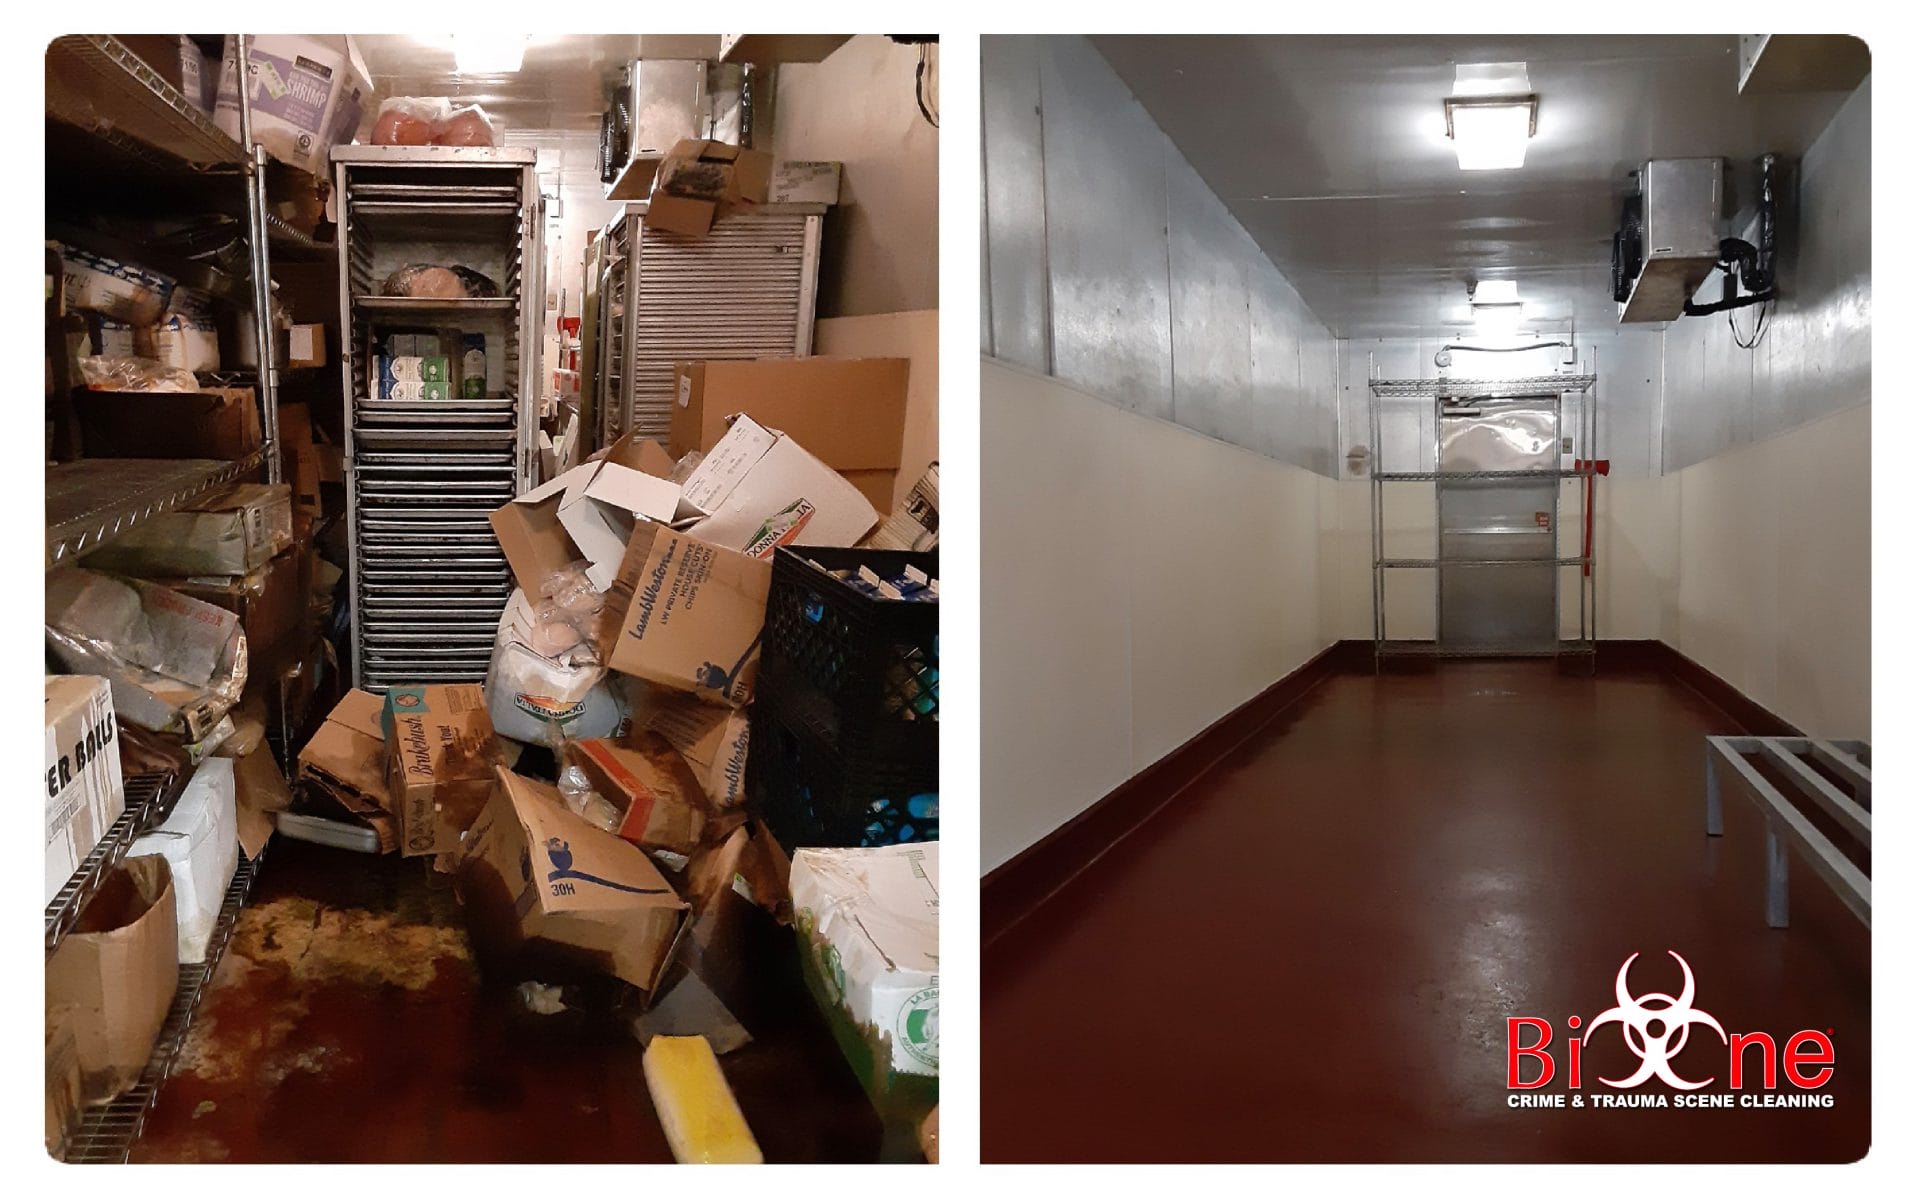 <img src="https://s3.amazonaws.com/news-img/client_8346/8346_1595561459783-Before___After_Freezer.jpg" alt = "Refrigerator and Freezer with rotten & spoiled food that needs cleaned out">